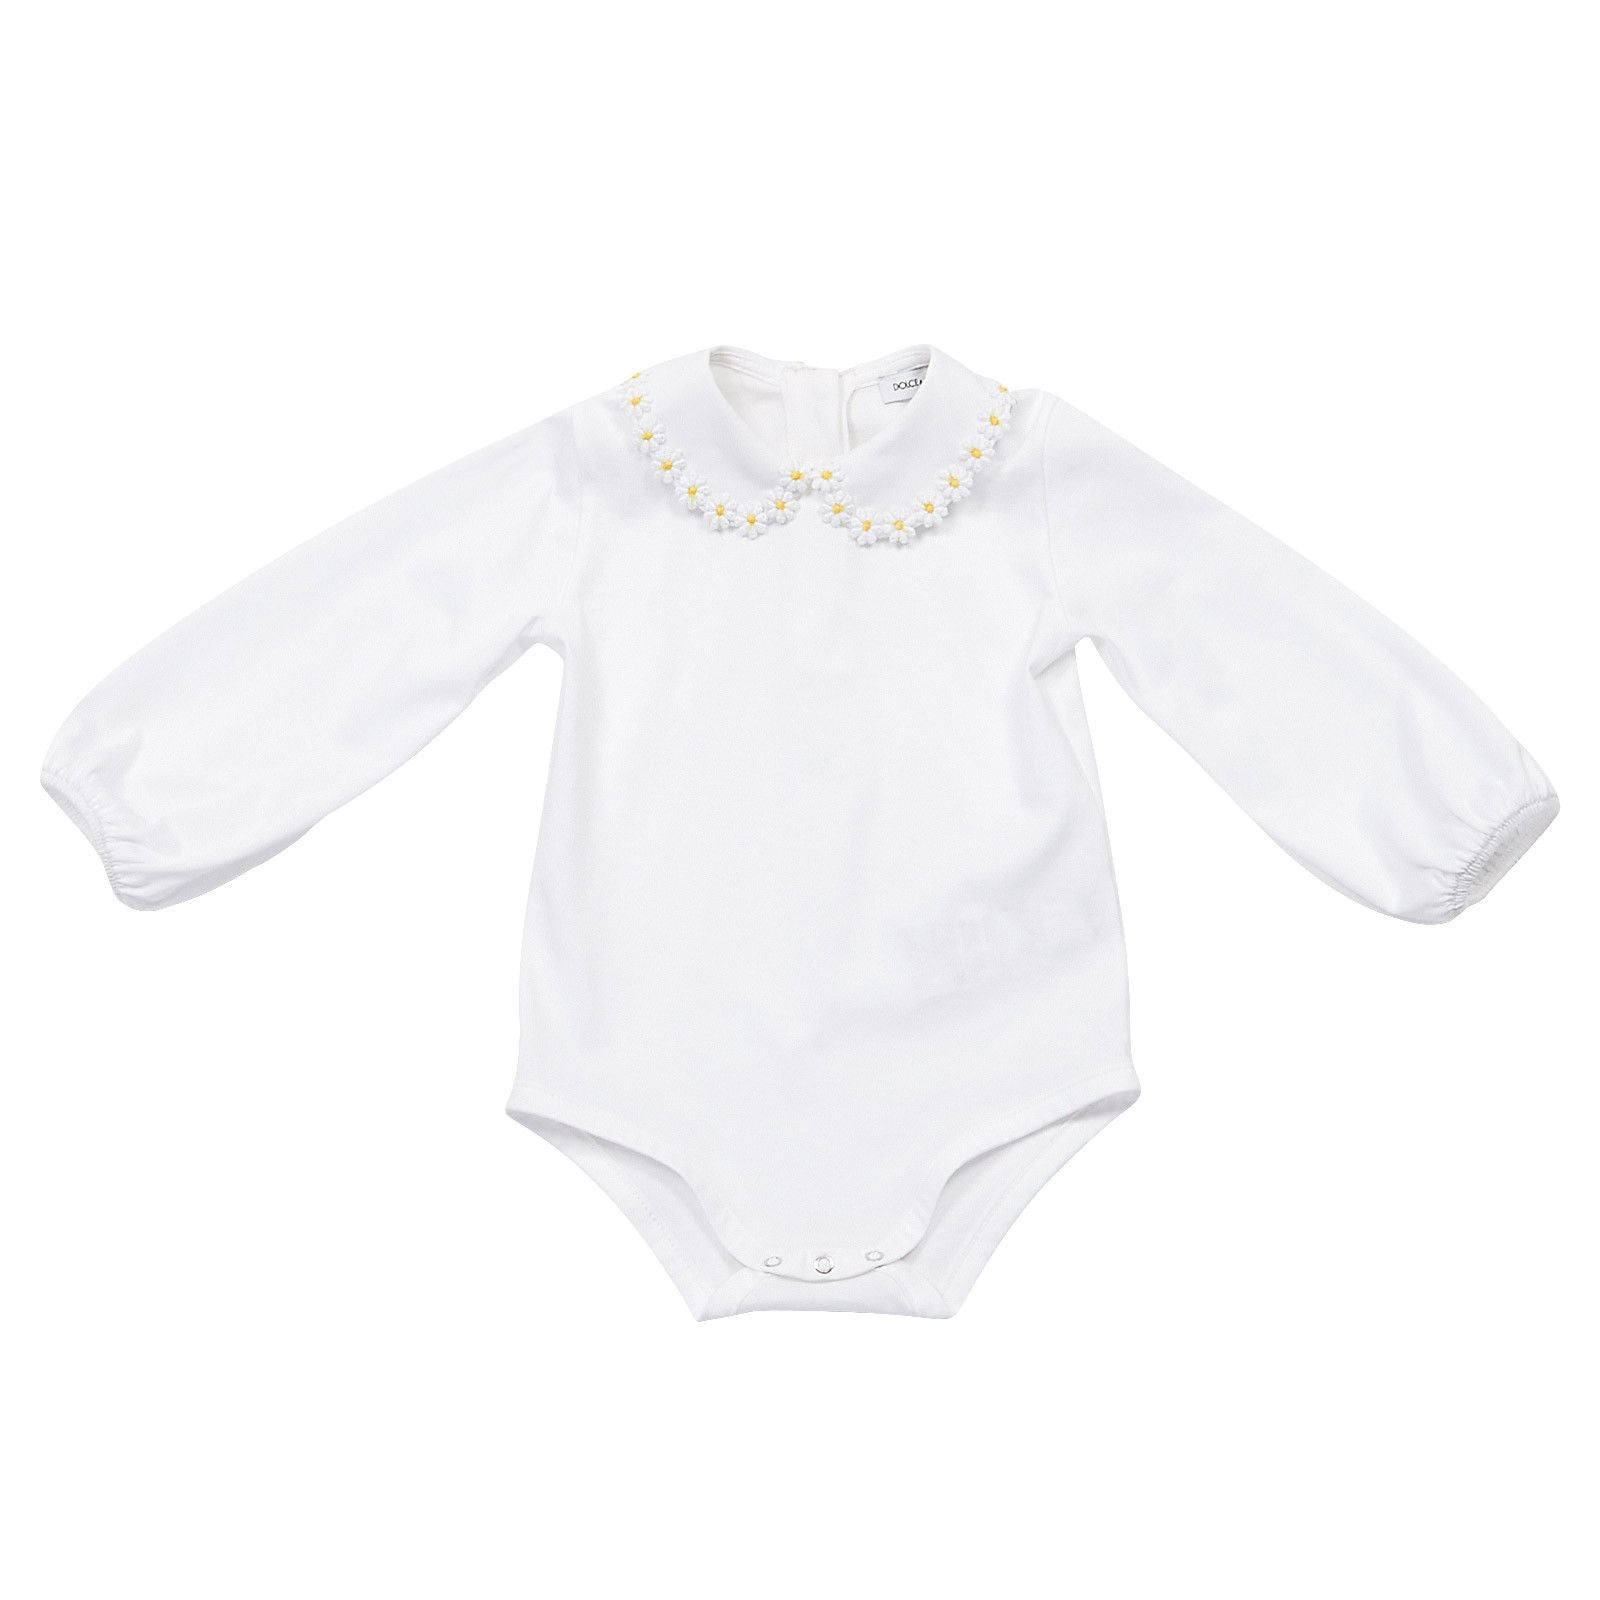 Baby Girls Ivory Bodysuit With Frill Collar - CÉMAROSE | Children's Fashion Store - 1